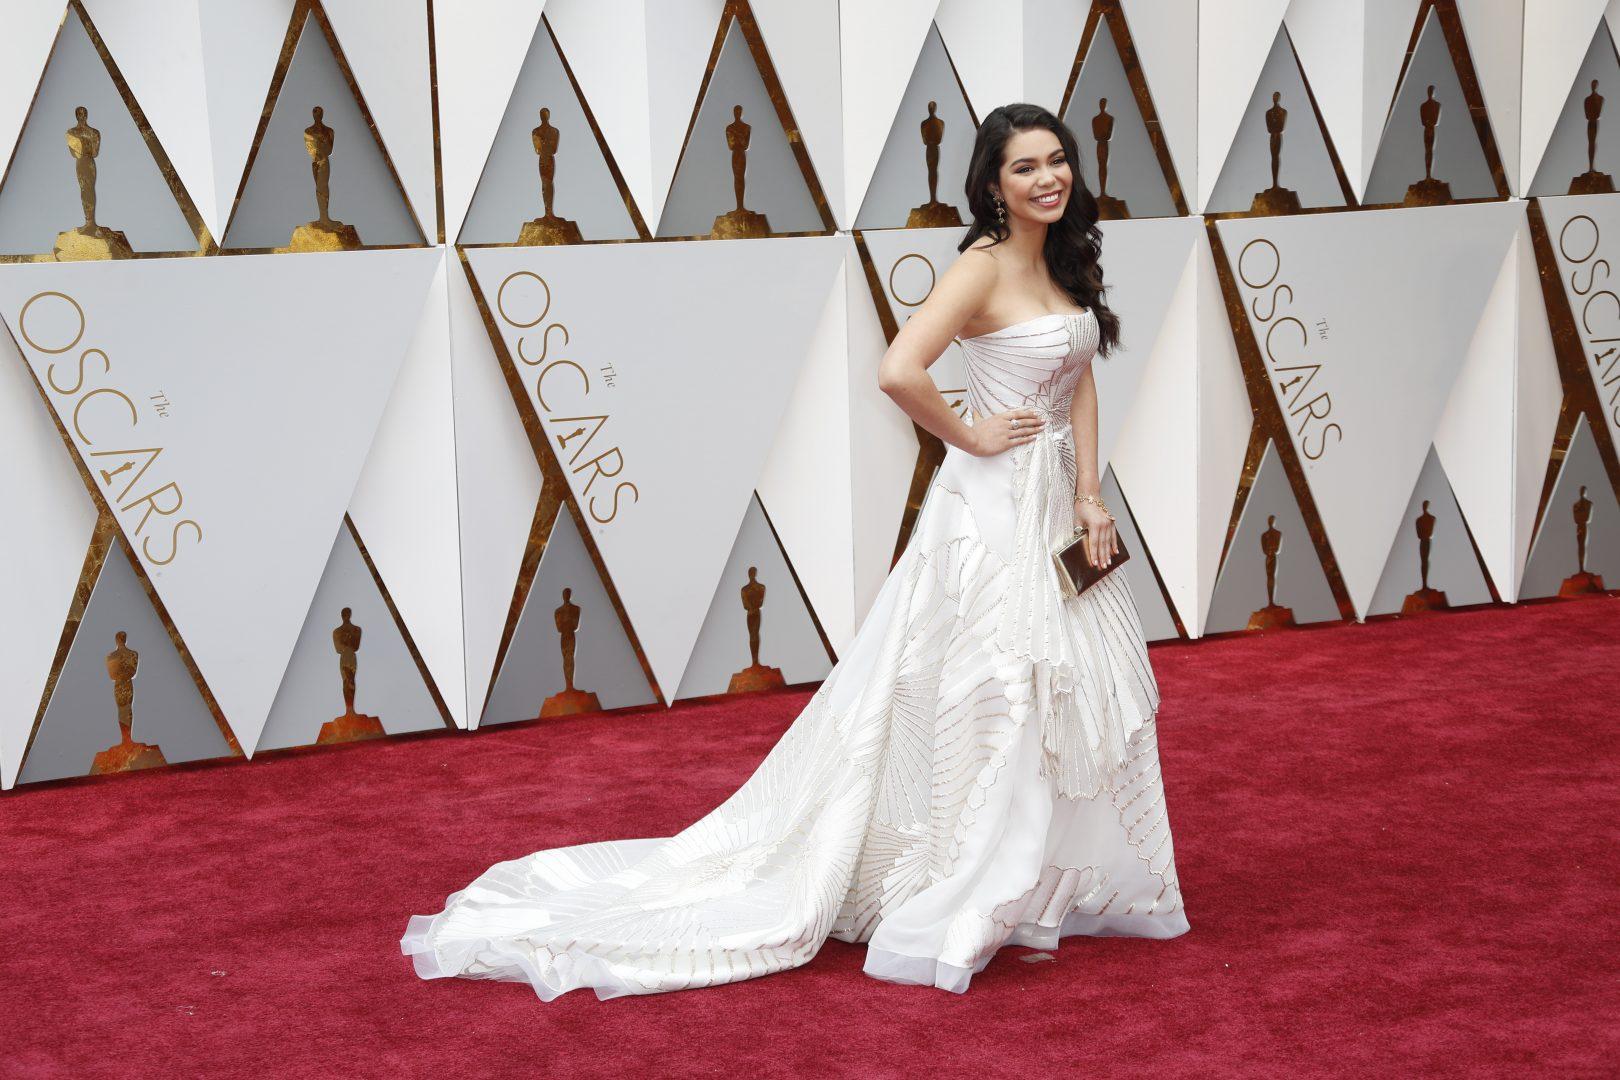 Lead actress Aulii Cravalho arrives at the 89th Academy Awards on Sunday, Feb. 26, 2017, at the Dolby Theatre at Hollywood & Highland Center in Hollywood. (Jay L. Clendenin/Los Angeles Times/TNS)